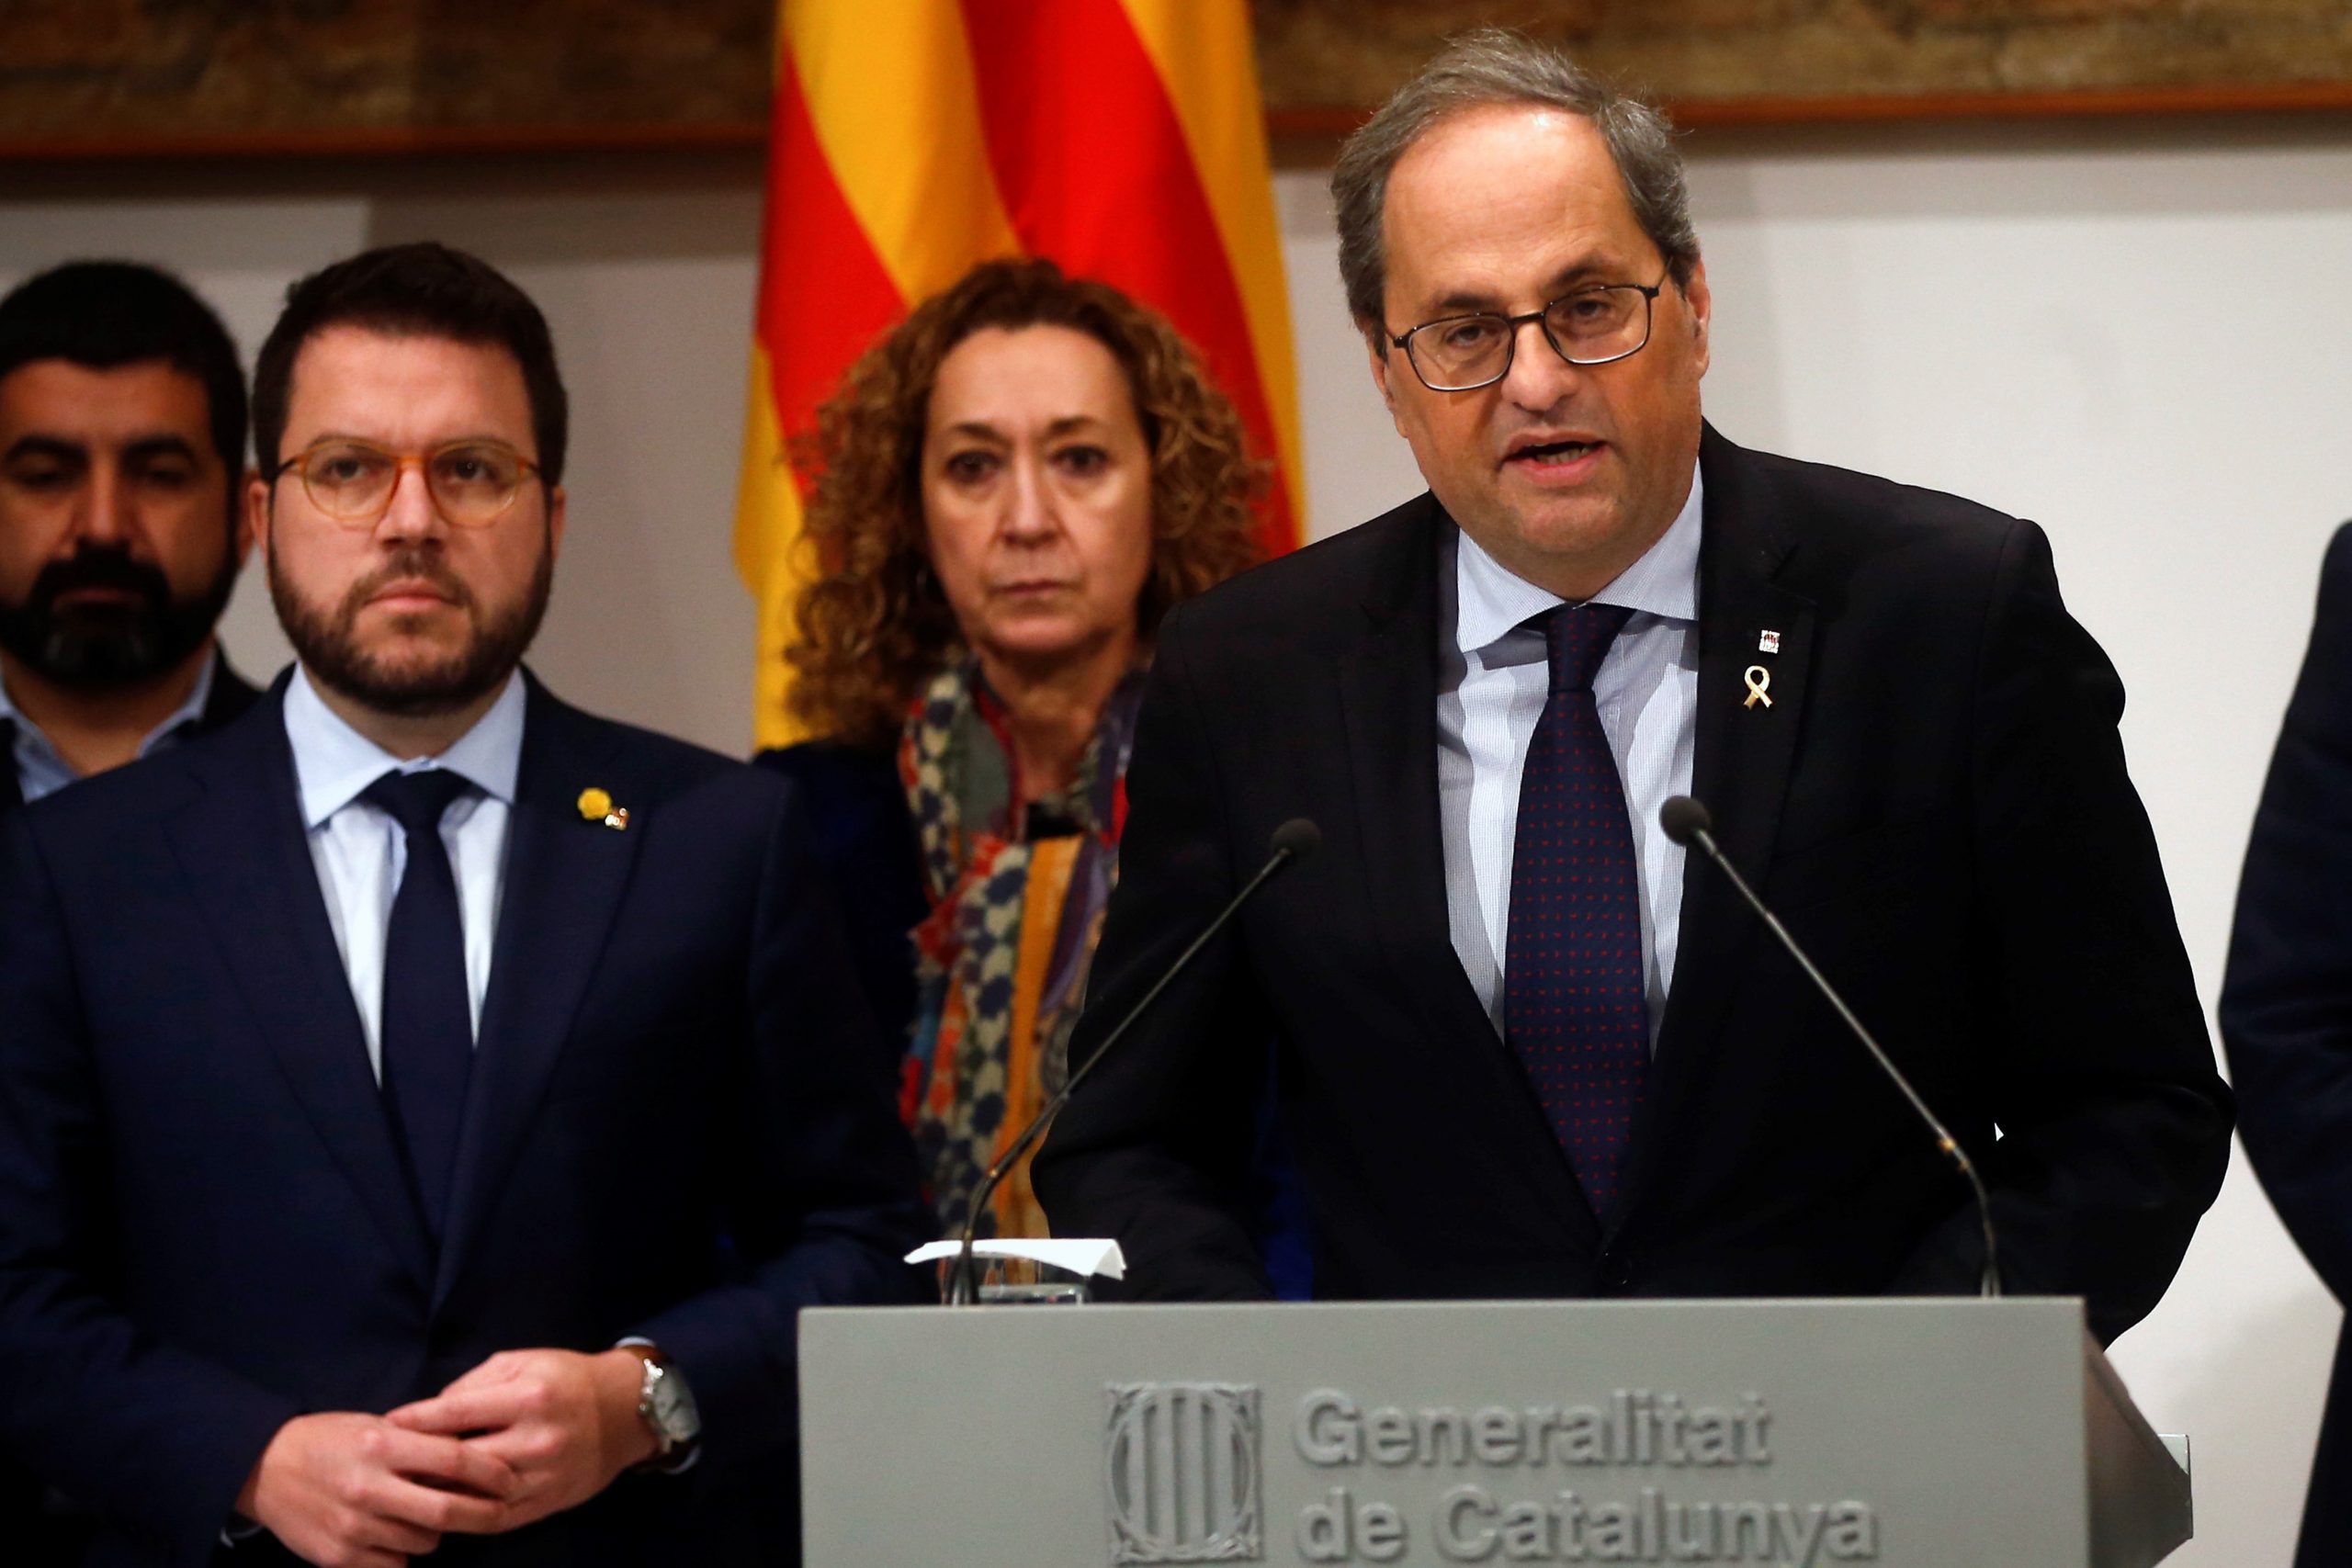 epa08116853 Catalan regional President, Quim Torra (R), and Vice President, Pere Aragones (L), address a press conference in Barcelona, Spain, 10 January 2020, to announce he 'does not recognize the effects' of the Supreme's Court announcement. The Supreme Court has denied Torra's petition to urgently suspend the decision made by the Spanish Electoral Commission, last 03 January 2020, of withdrawing Torra's MP certificate after last 19 December 2019, the Catalan Superior Court of Justice sentenced Torra to be suspended for 18 months after he refused to withdraw pro-independence symbols from public buildings during the electoral period.  EPA/Quique García